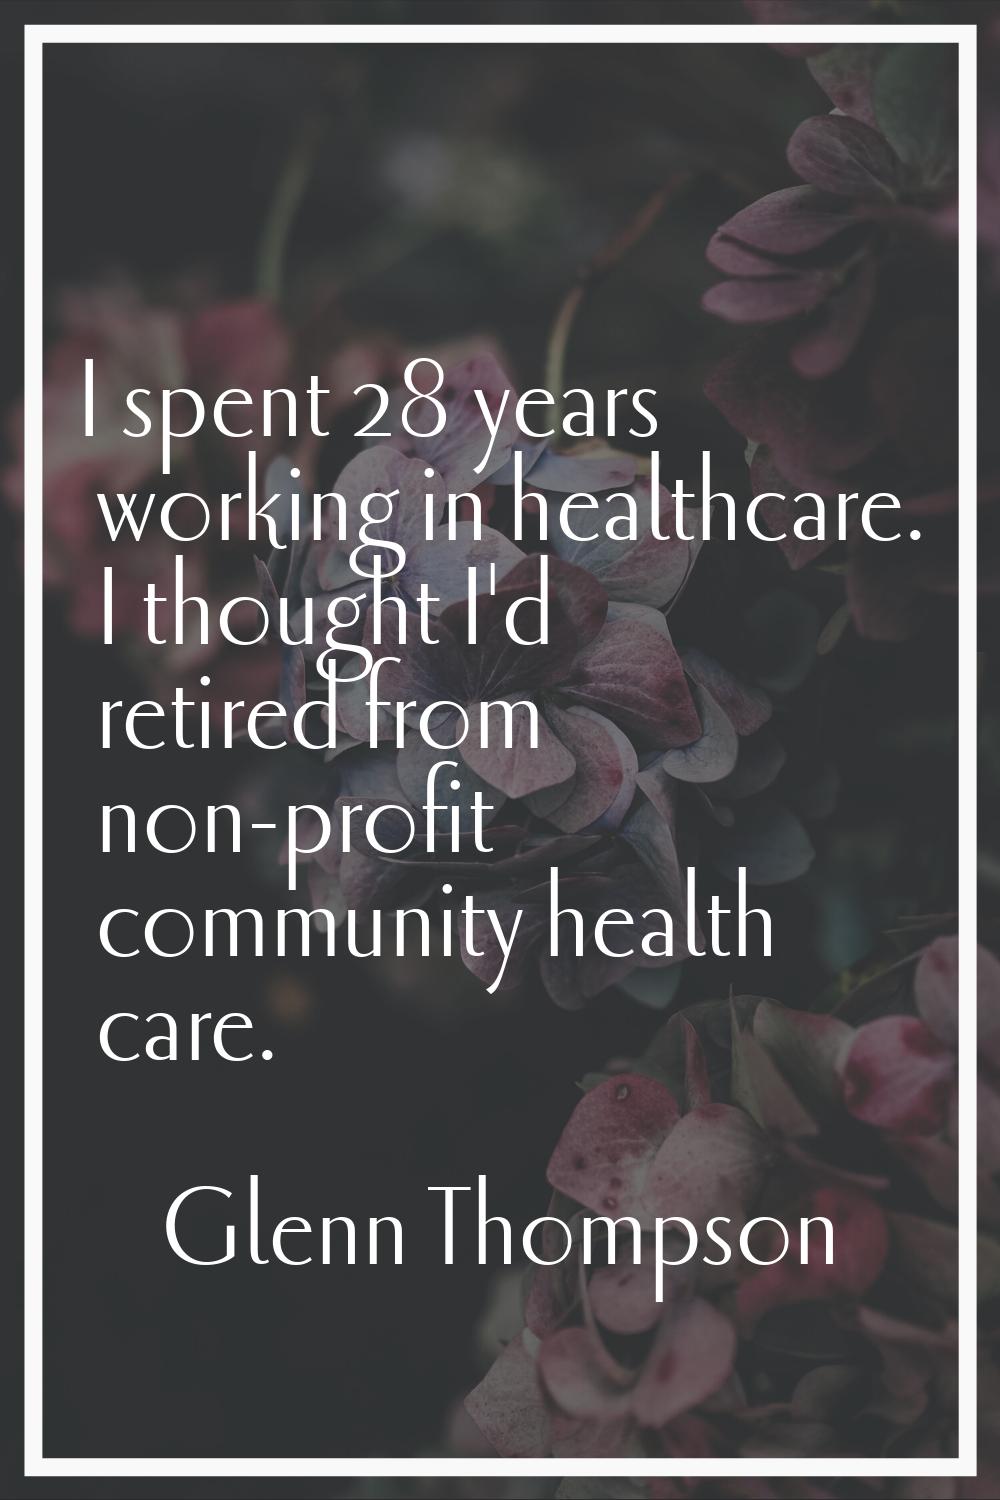 I spent 28 years working in healthcare. I thought I'd retired from non-profit community health care